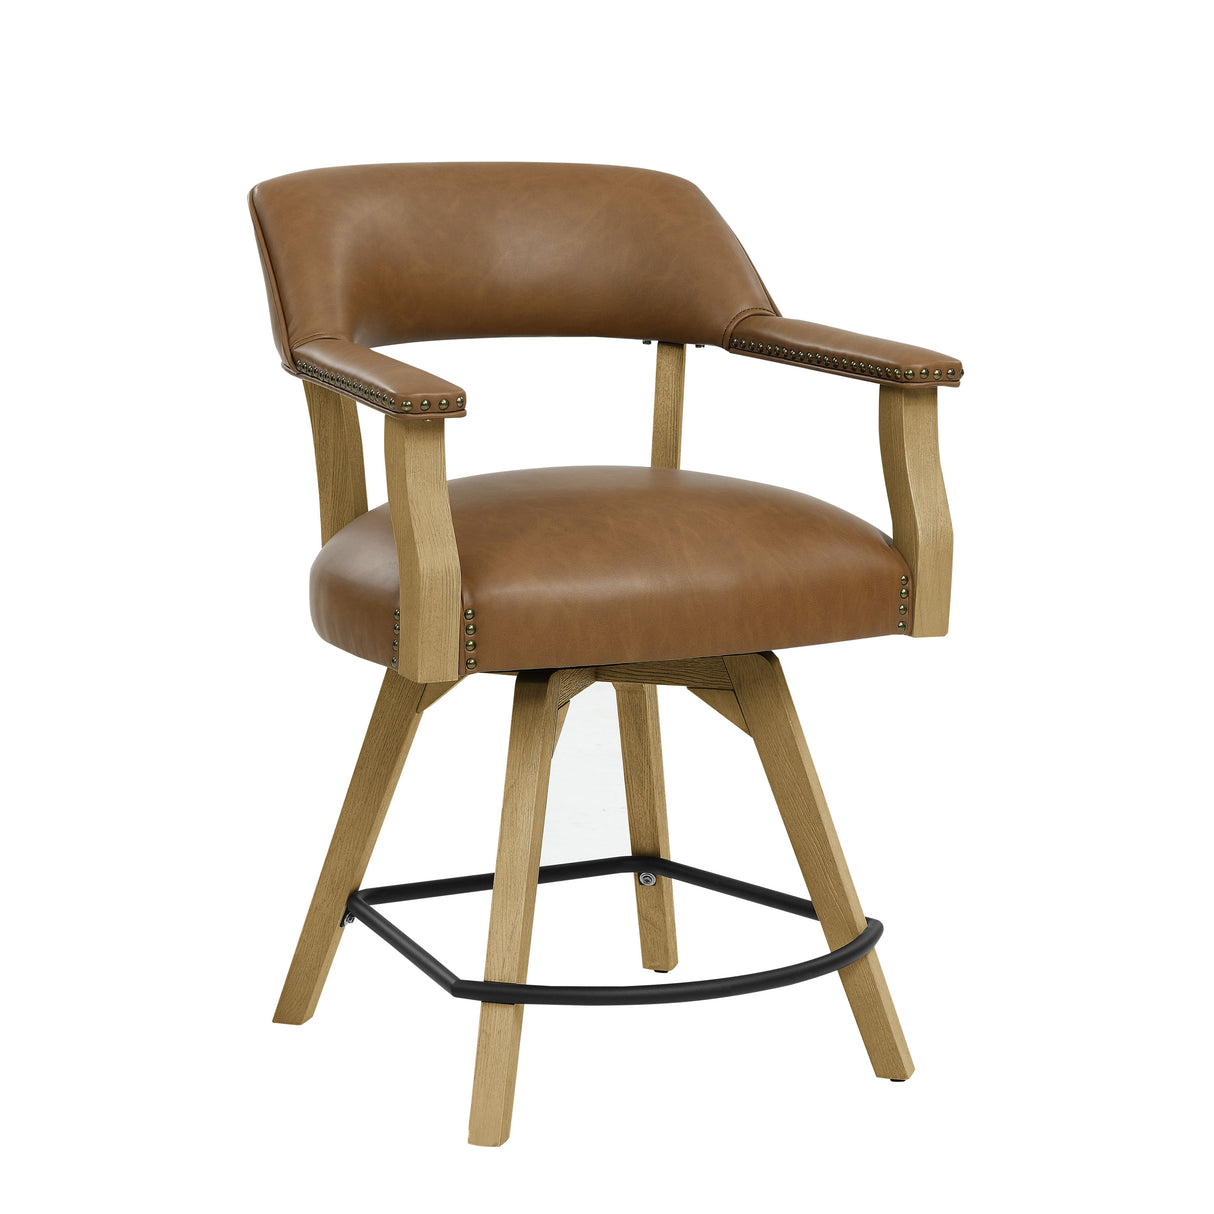 Rylie - Swivel Vegan Leather Counter Chair - Camel